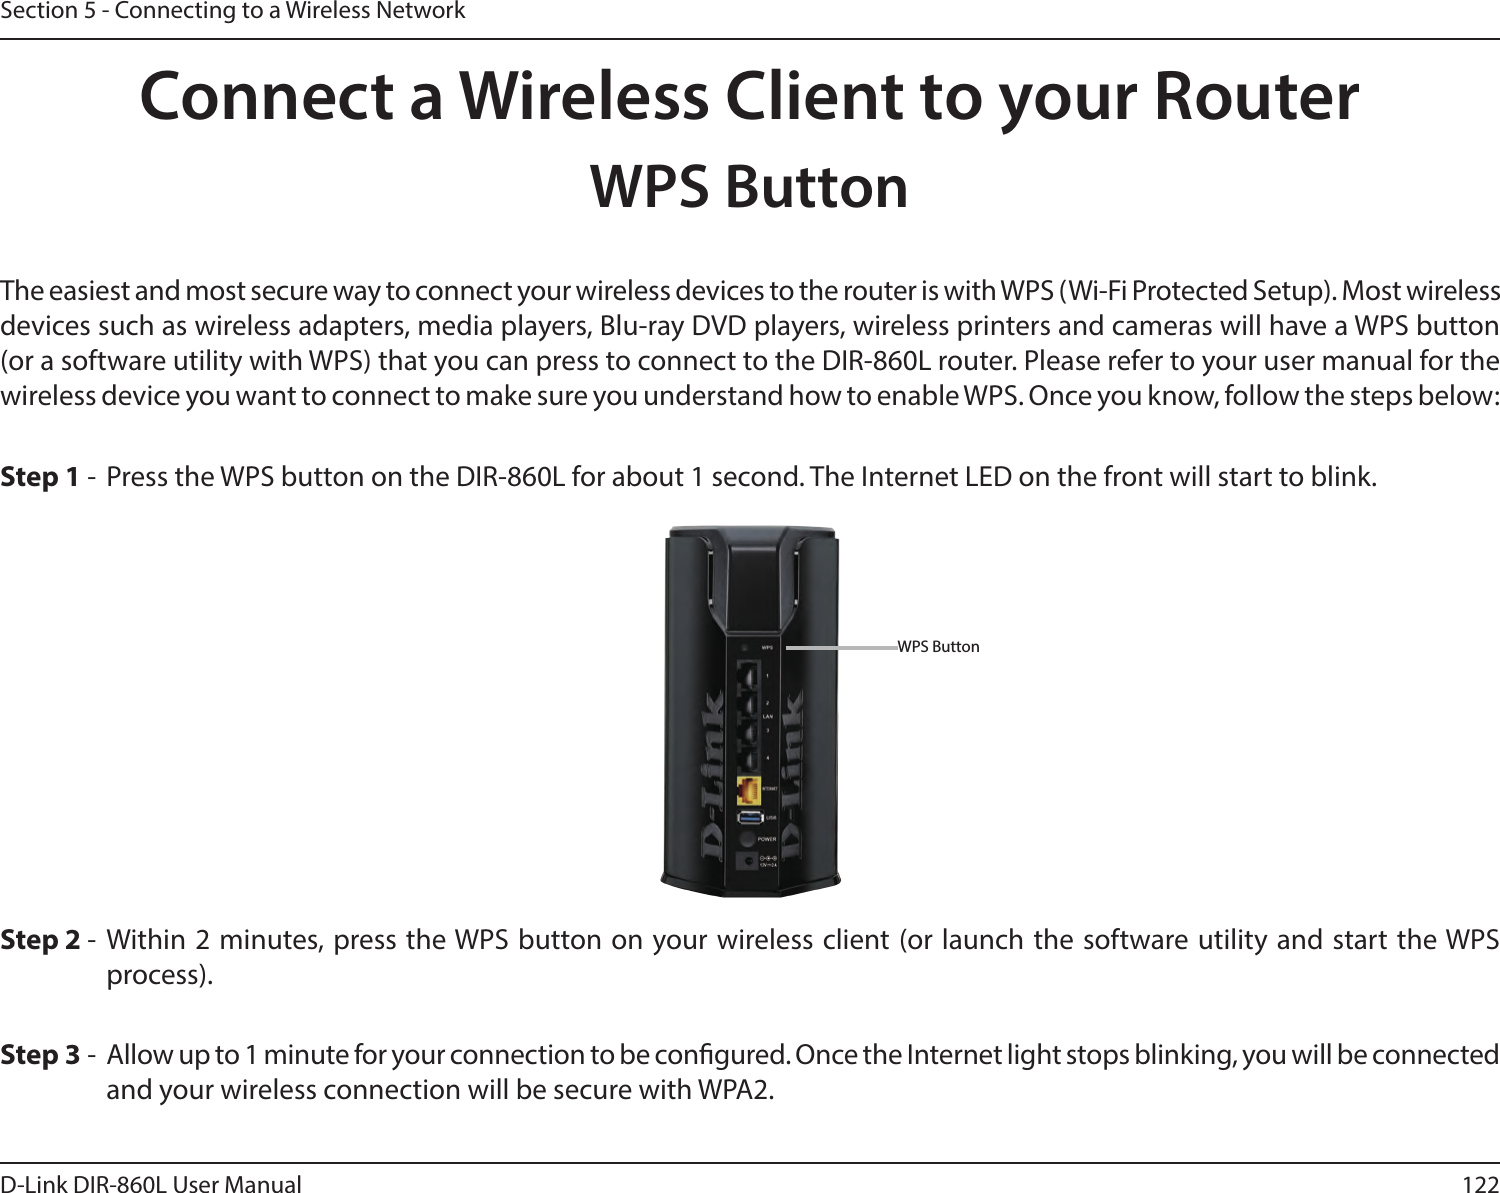 122D-Link DIR-860L User ManualSection 5 - Connecting to a Wireless NetworkConnect a Wireless Client to your RouterWPS ButtonStep 2 - Within 2 minutes, press the WPS button on your wireless client (or launch the software utility and start the WPS process).The easiest and most secure way to connect your wireless devices to the router is with WPS (Wi-Fi Protected Setup). Most wireless devices such as wireless adapters, media players, Blu-ray DVD players, wireless printers and cameras will have a WPS button (or a software utility with WPS) that you can press to connect to the DIR-860L router. Please refer to your user manual for the wireless device you want to connect to make sure you understand how to enable WPS. Once you know, follow the steps below:Step 1 - Press the WPS button on the DIR-860L for about 1 second. The Internet LED on the front will start to blink.Step 3 - Allow up to 1 minute for your connection to be congured. Once the Internet light stops blinking, you will be connected and your wireless connection will be secure with WPA2.WPS Button